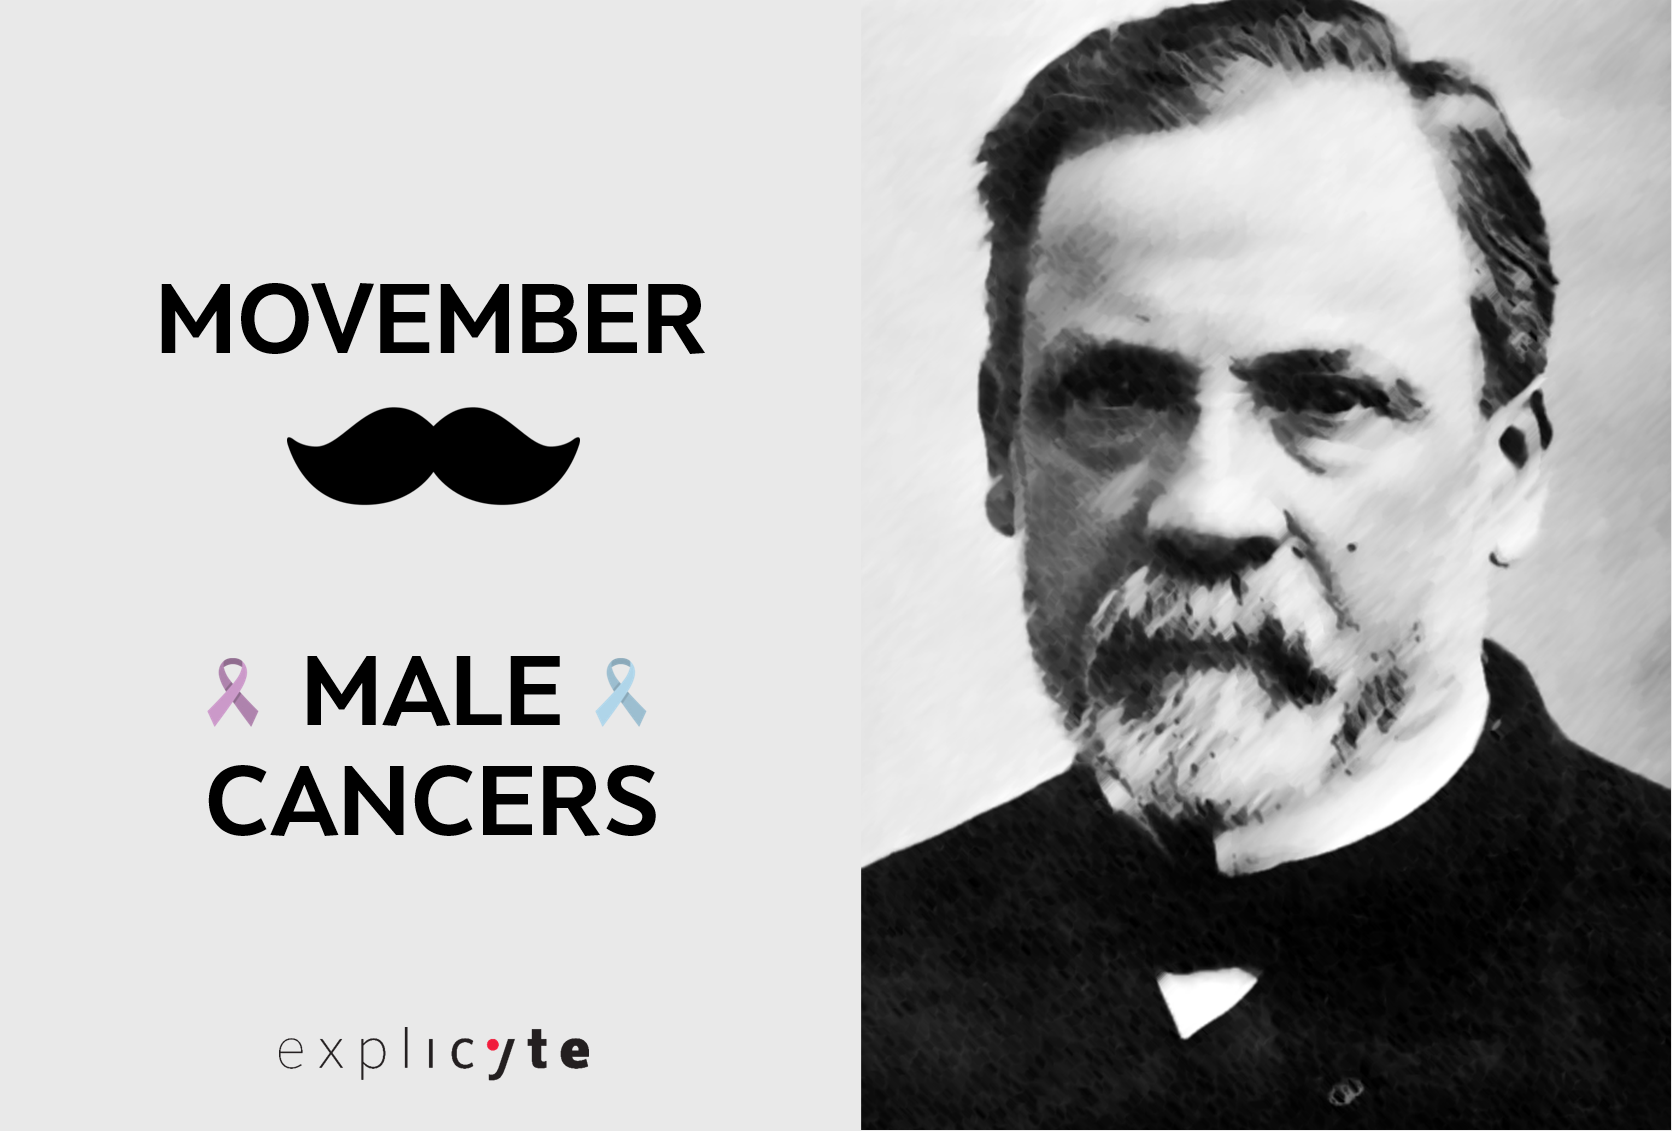 Check out  Our mustachioed icon as favorite image of November!